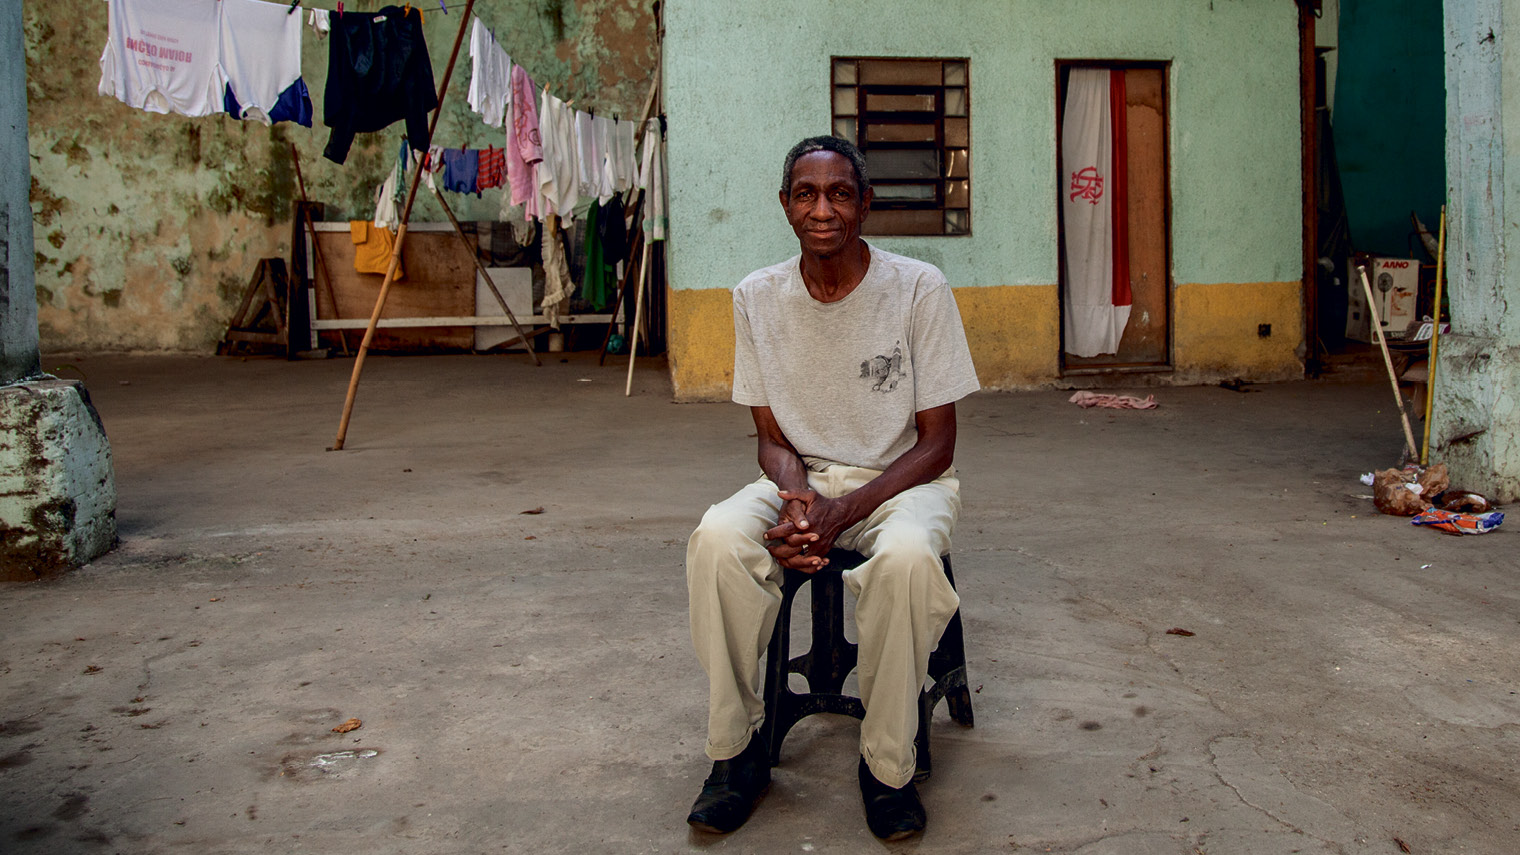 Paulo Cezar de Paula, 62, in the abandoned warehouse his family and two others have been occupying for the past three years. De Paula was evicted from the Quilombo das Guerreiras occupation in 2013 to make space for the Trump Towers Rio